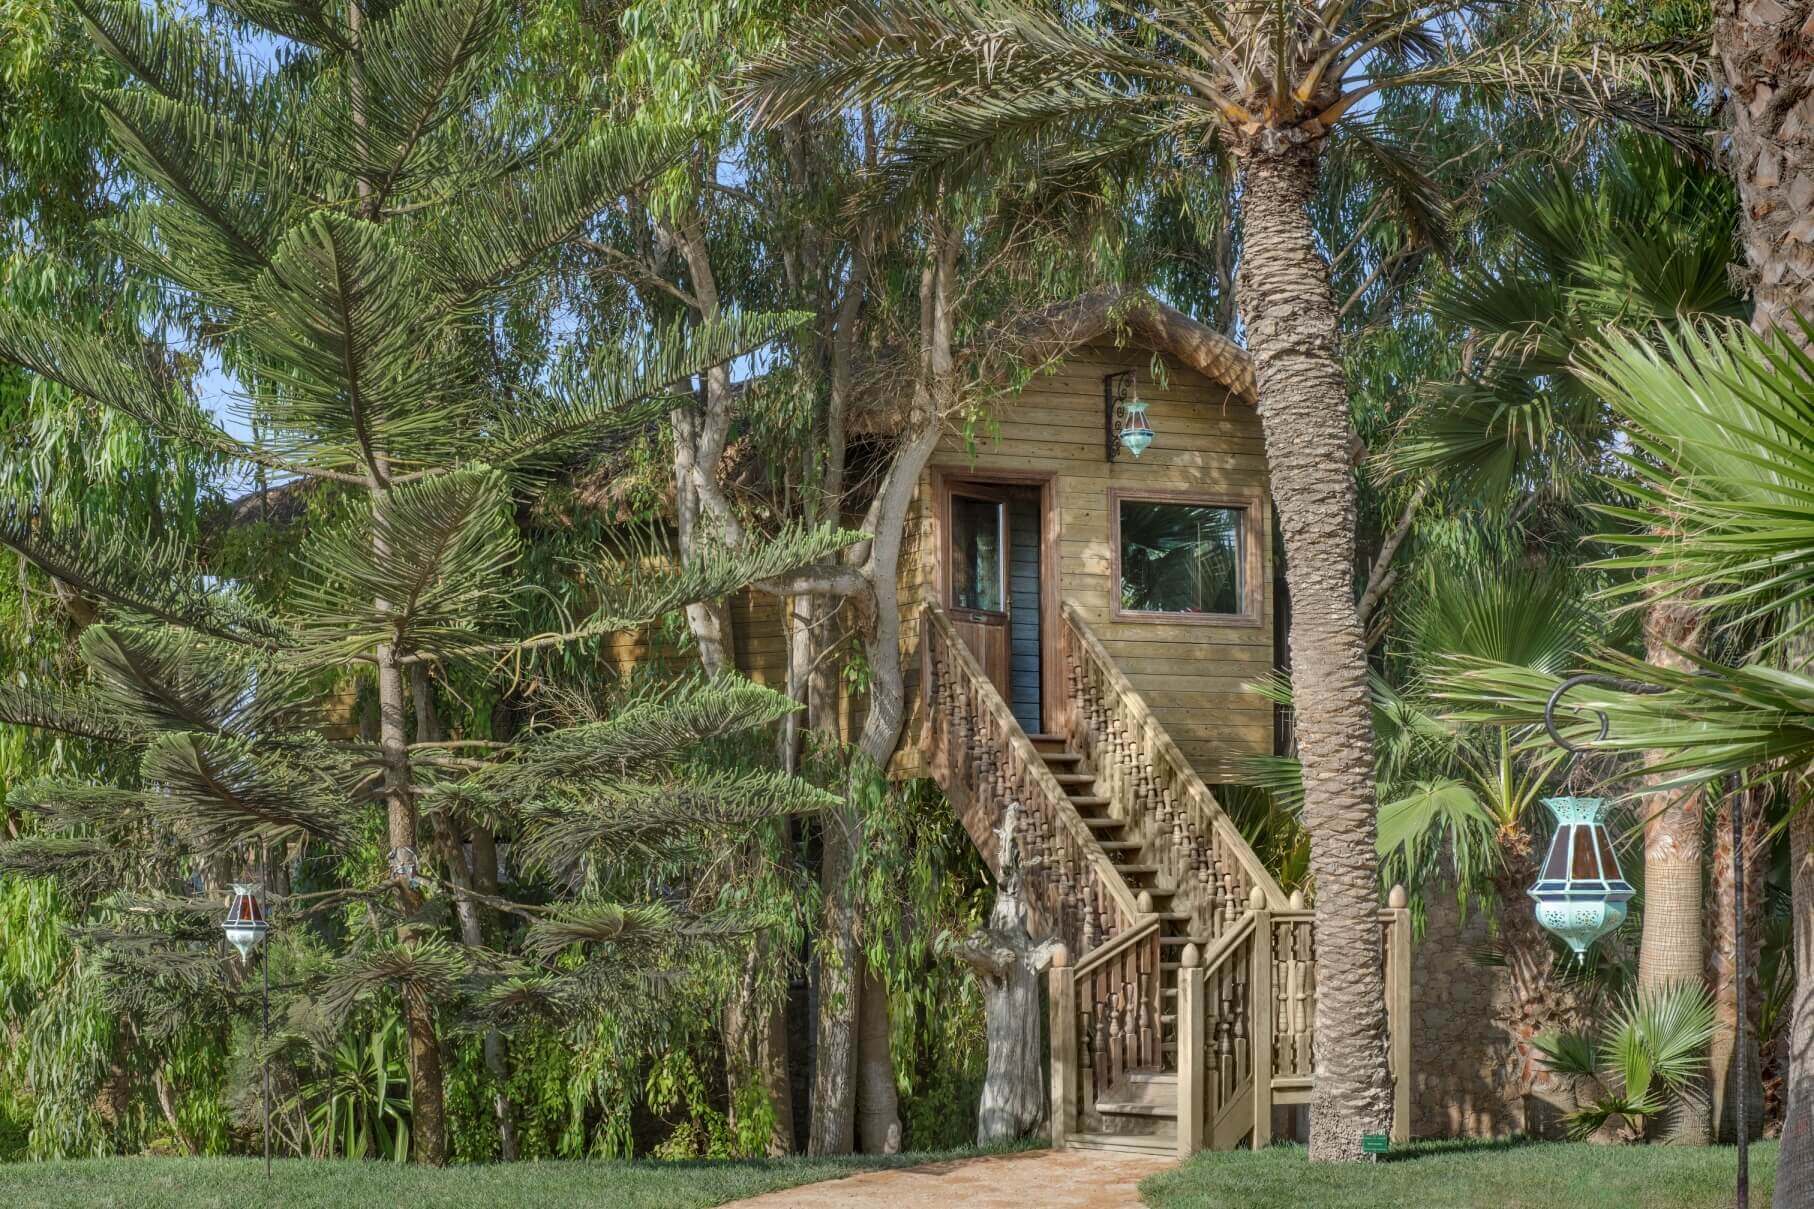 Adventurer Stay in a Treehouse at This Mountain Resort